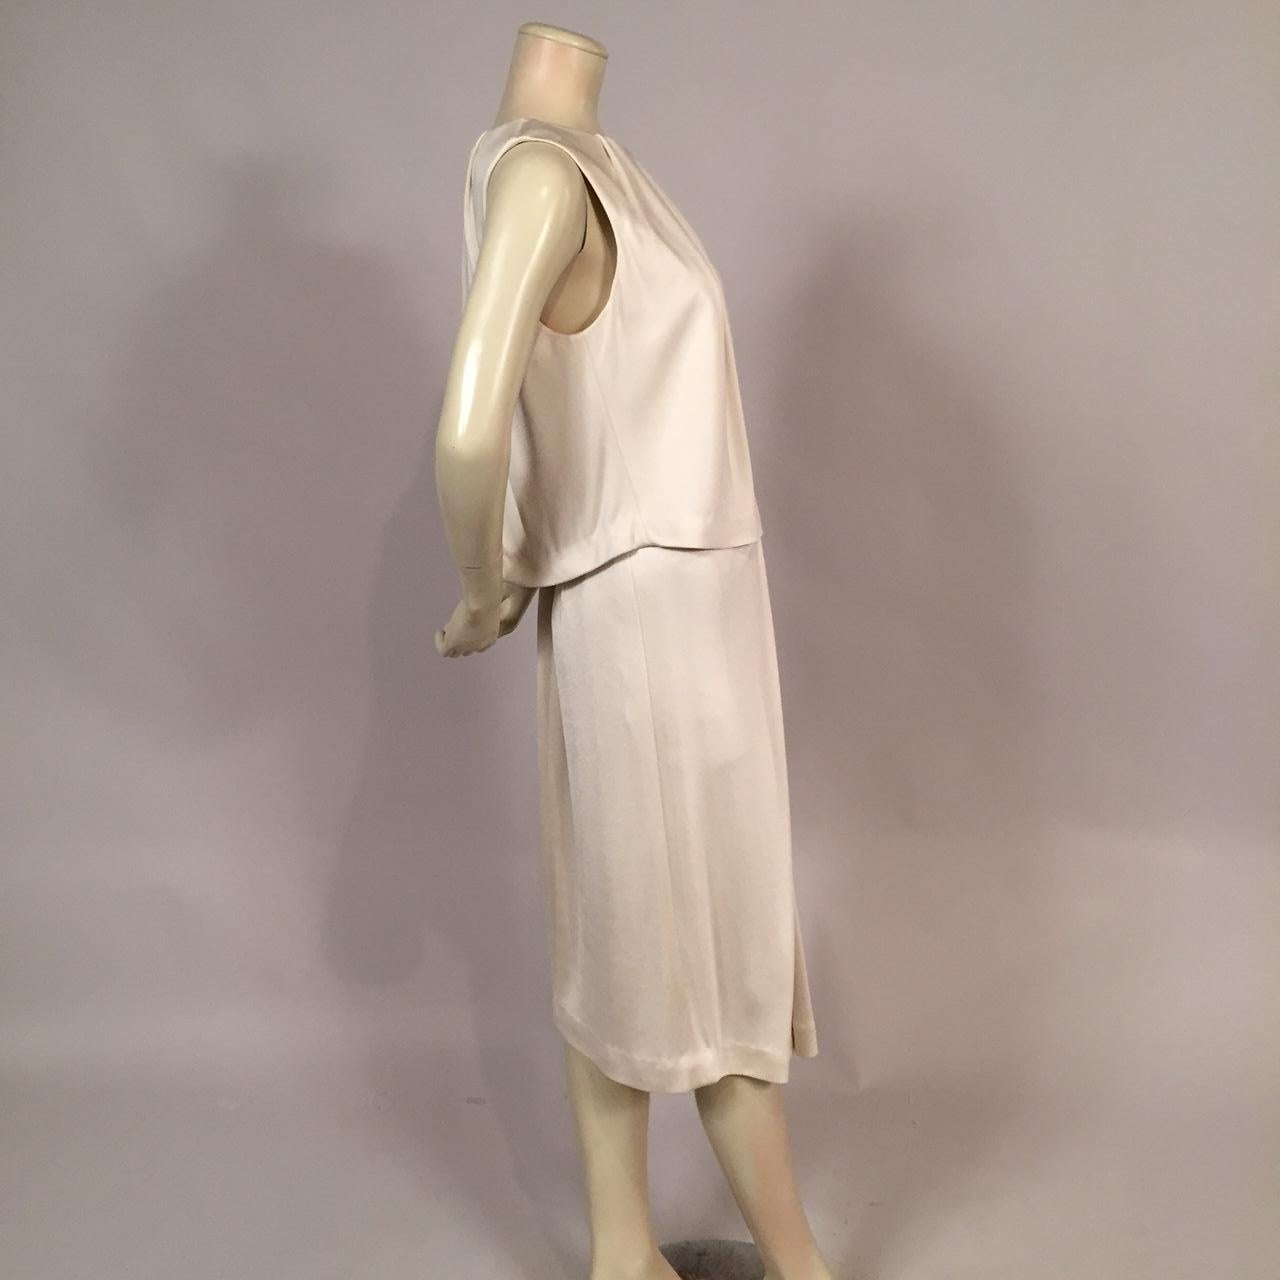 Carolina Herrera Ivory Silk Knit Dress In Excellent Condition For Sale In New Hope, PA